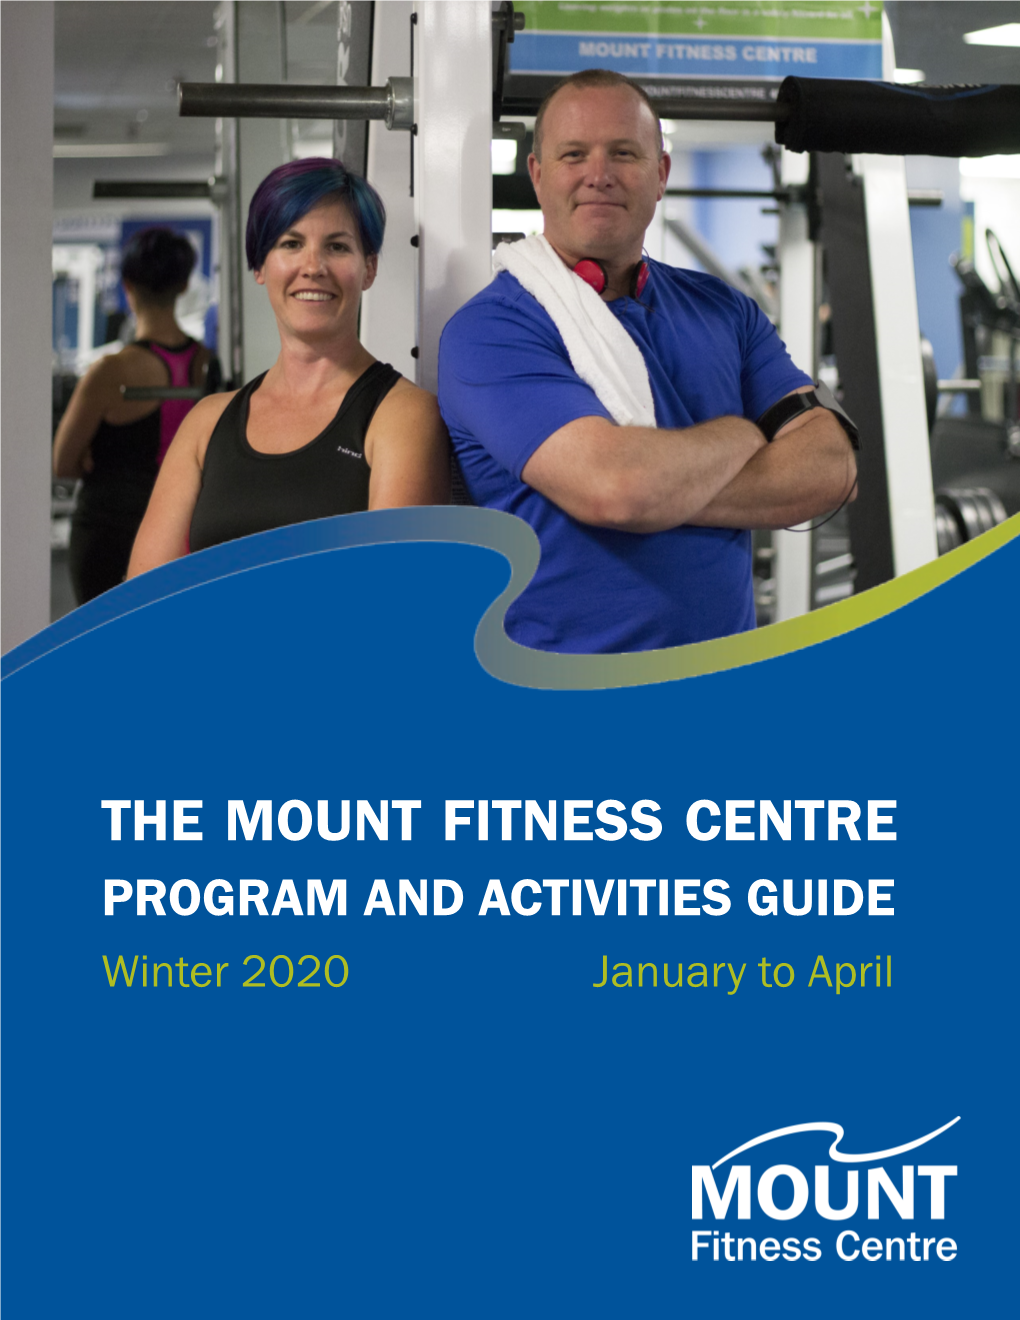 THE MOUNT FITNESS CENTRE PROGRAM and ACTIVITIES GUIDE Winter 2020 January to April TRY BEFORE YOU BUY RECREATION PROGRAMS